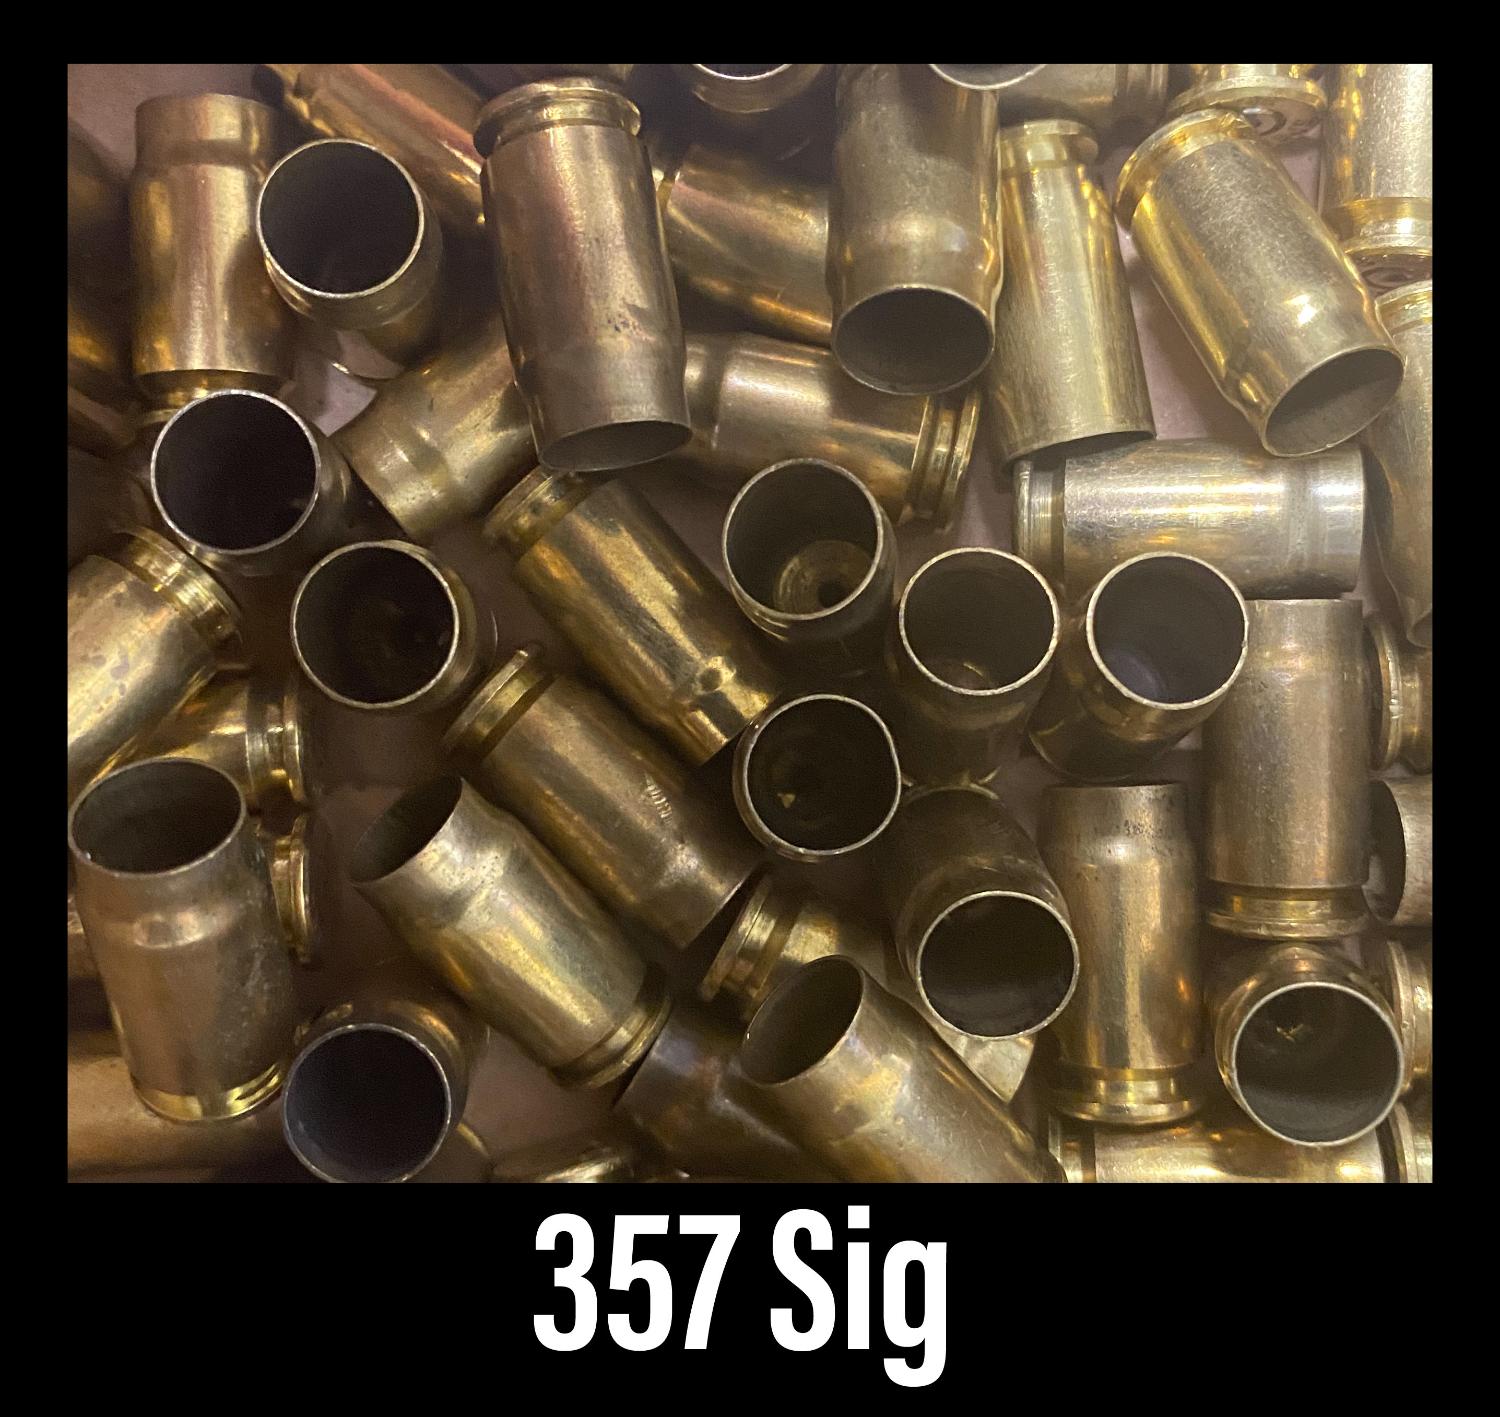  357 Sig Cleaned Brass 100ct